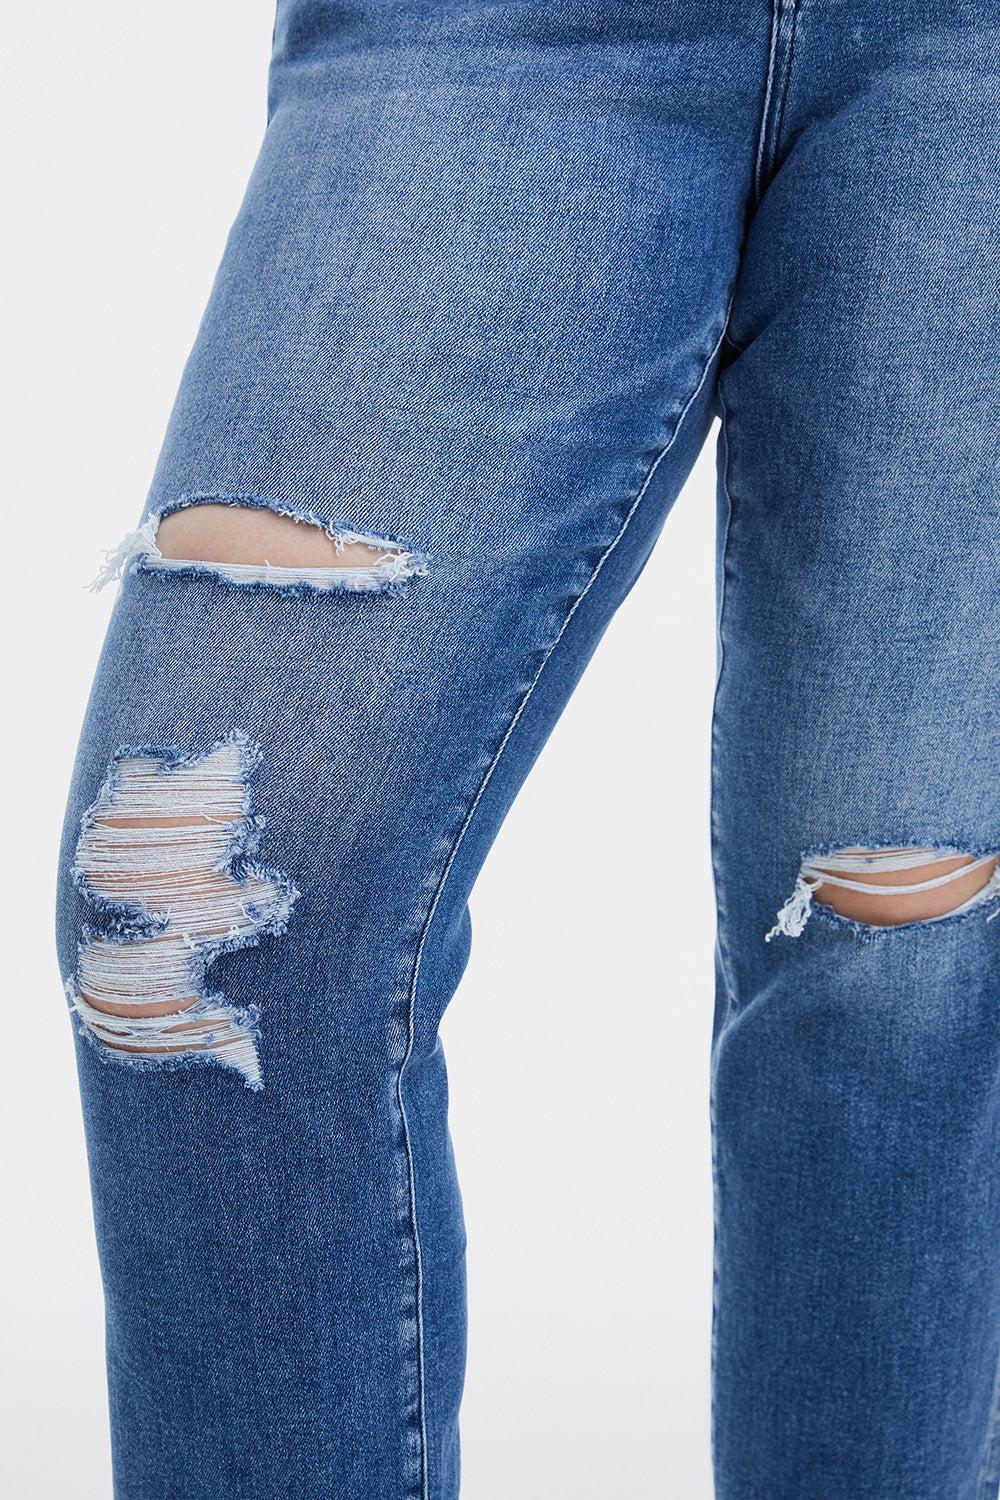 a pair of jeans with torn knees and knees